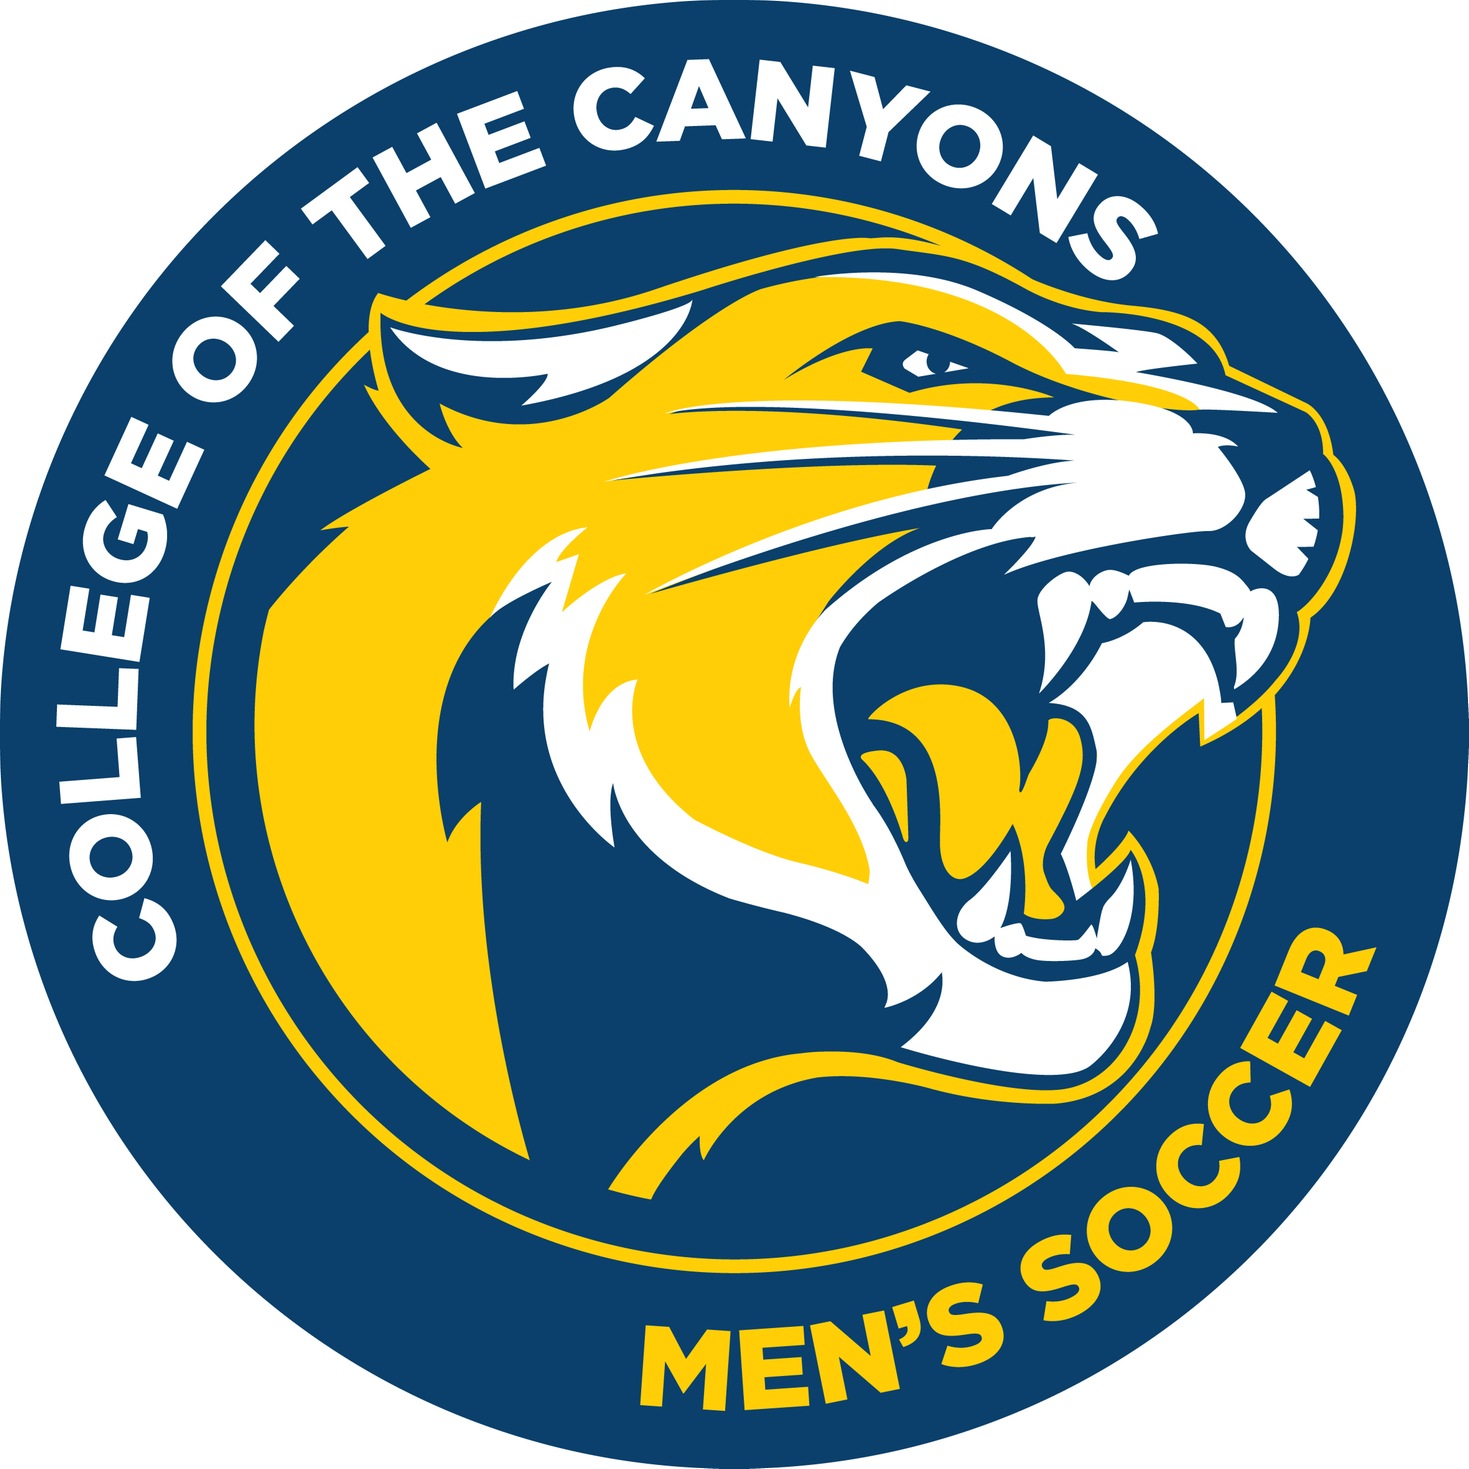 College of the Canyons men's soccer logo.